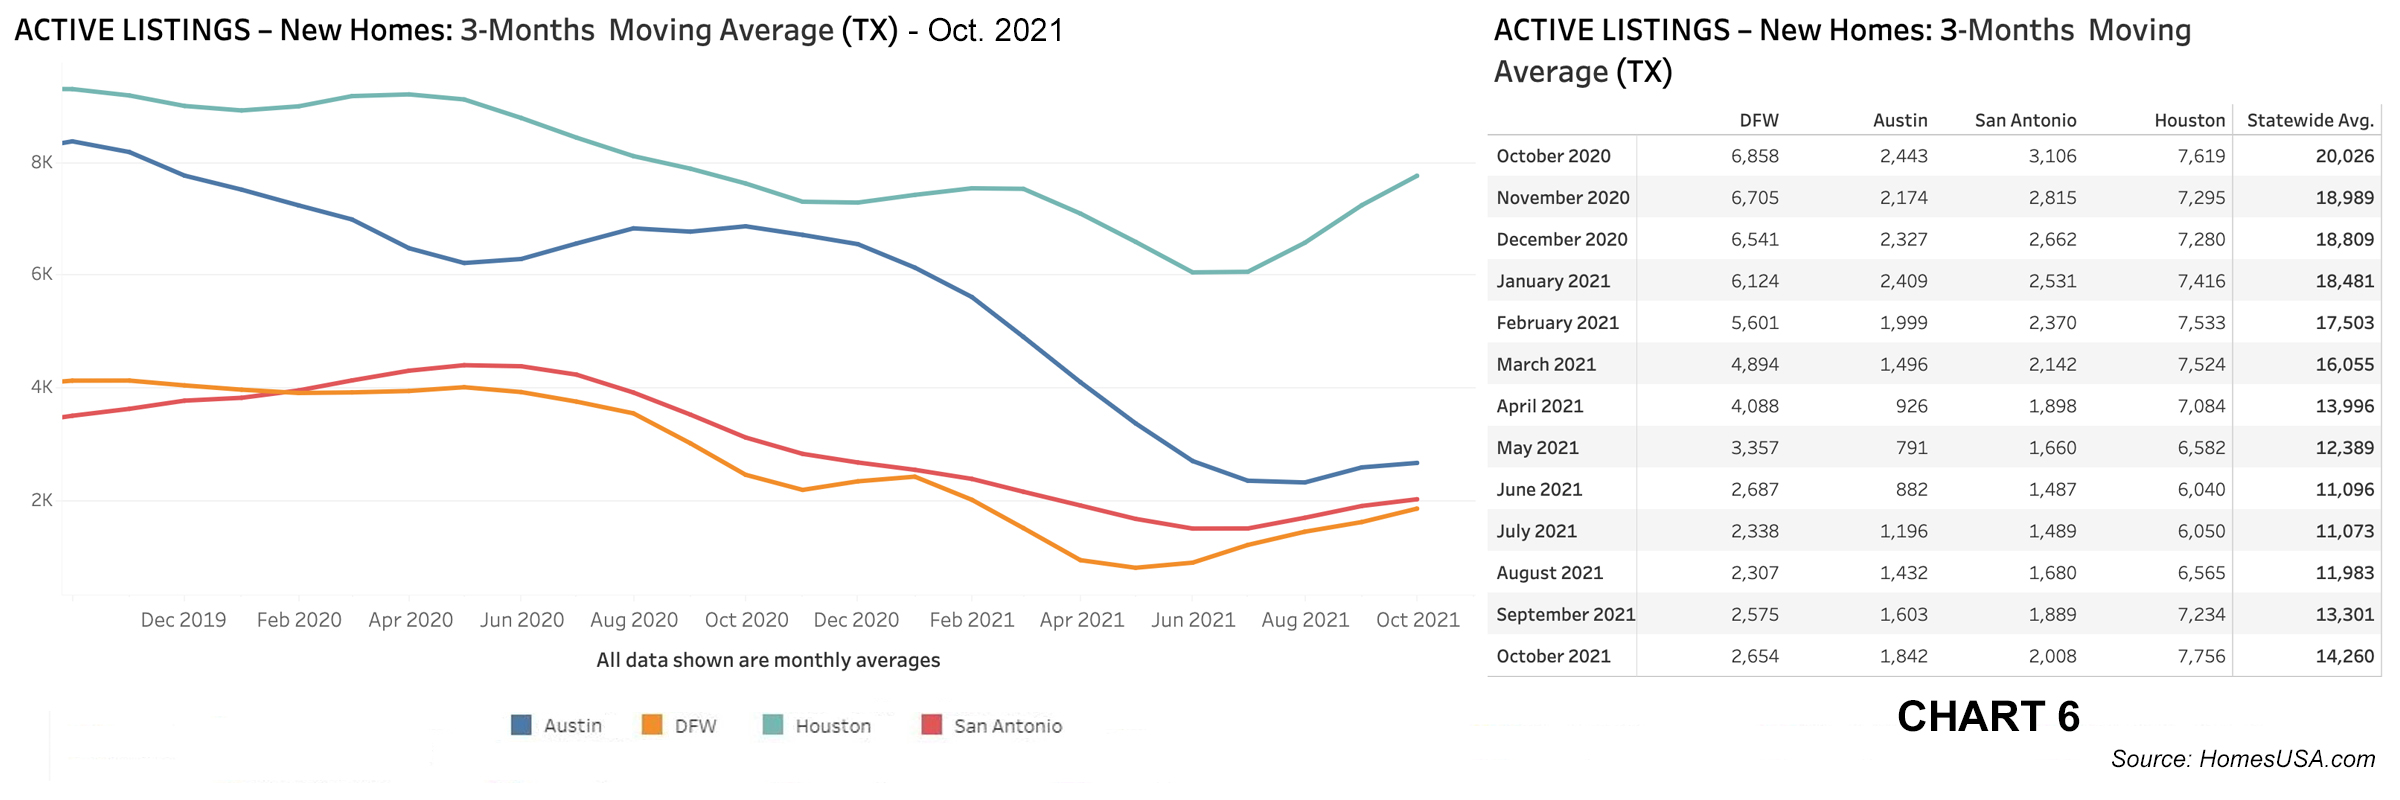 Chart 6: Texas Active Listings for New Homes – Oct. 2021